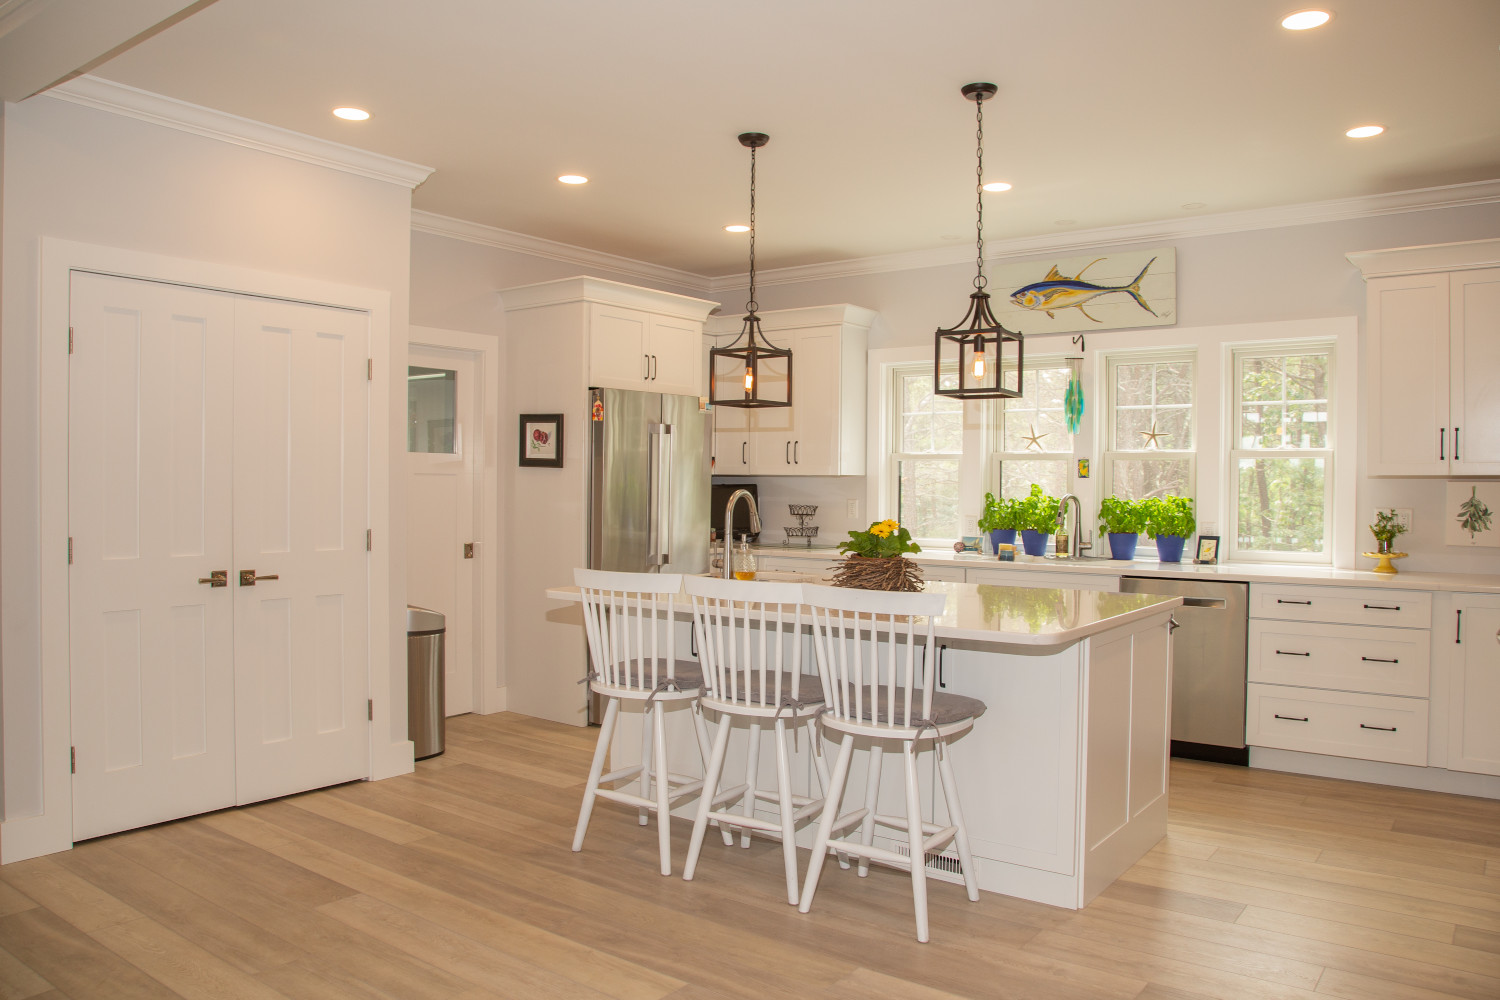 Kitchen of remodeled Cape home